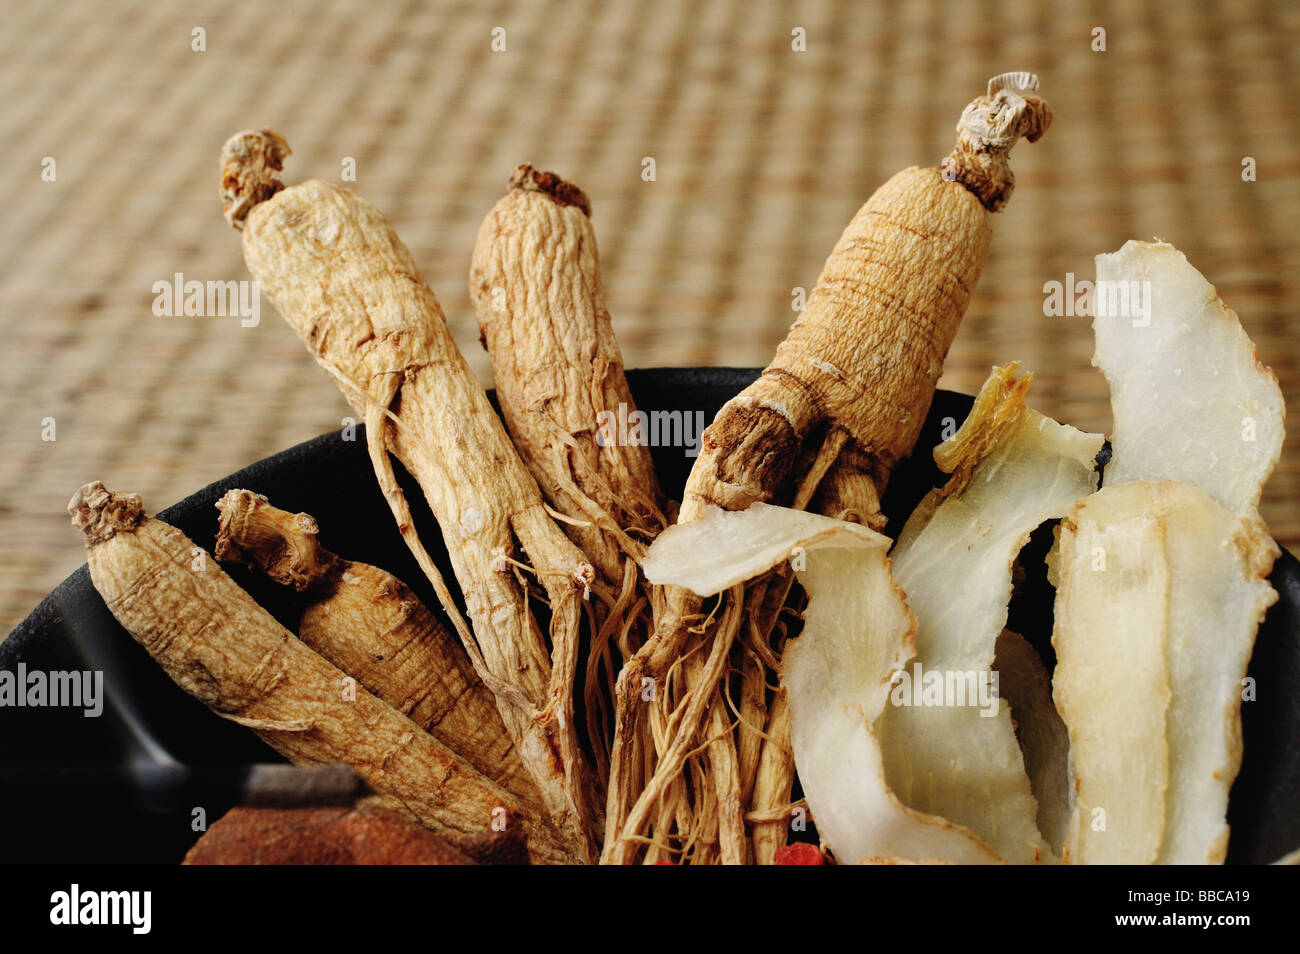 Bowl filled with Chinese medicinal herbs, close-up Stock Photo